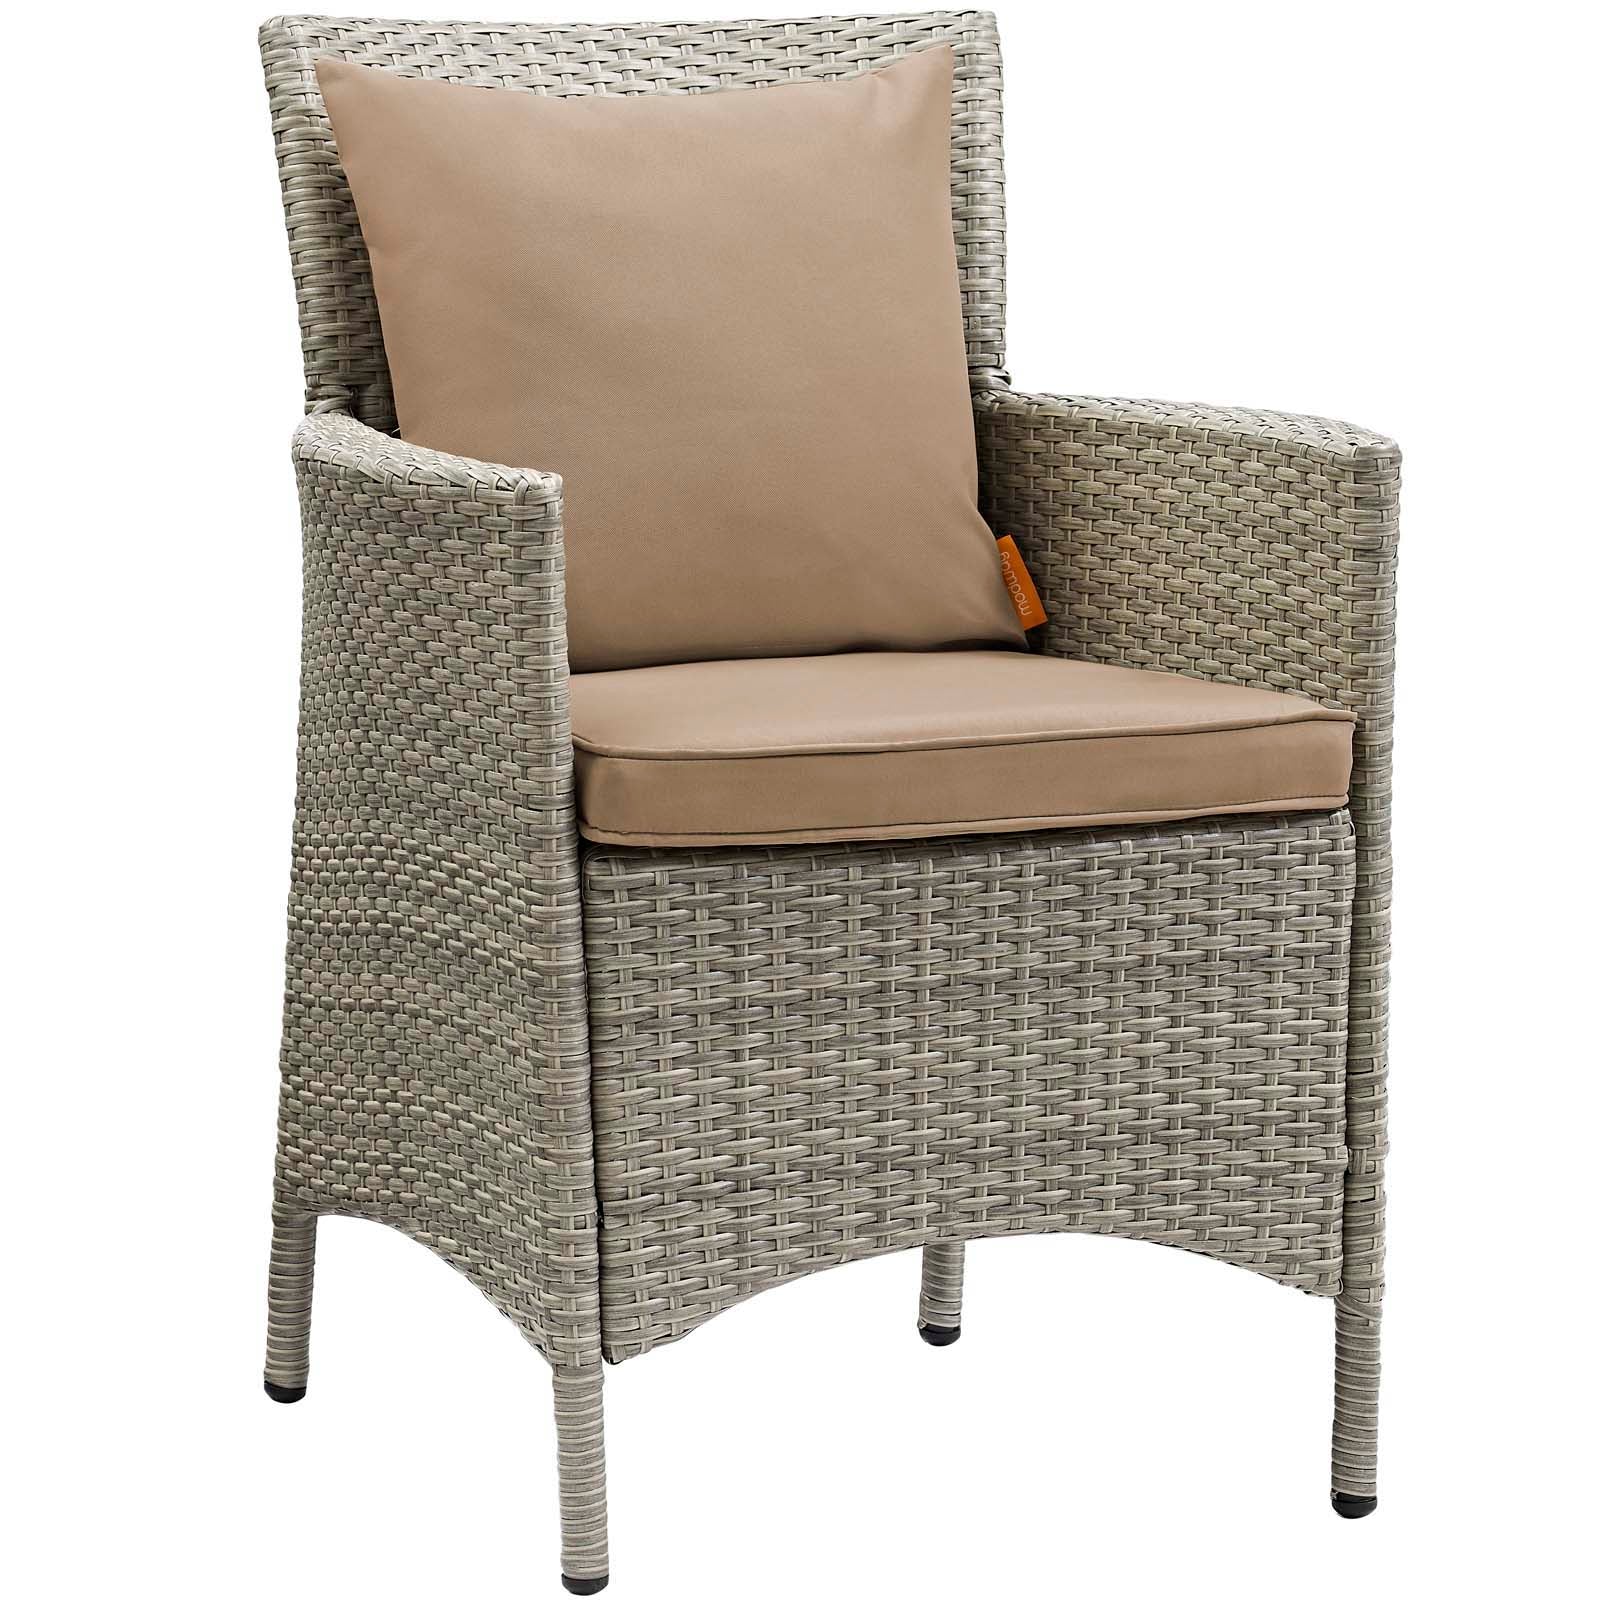 Modway Outdoor Dining Chairs - Conduit Outdoor Patio Wicker Rattan Dining Armchair Set of 4 Light Gray Mocha